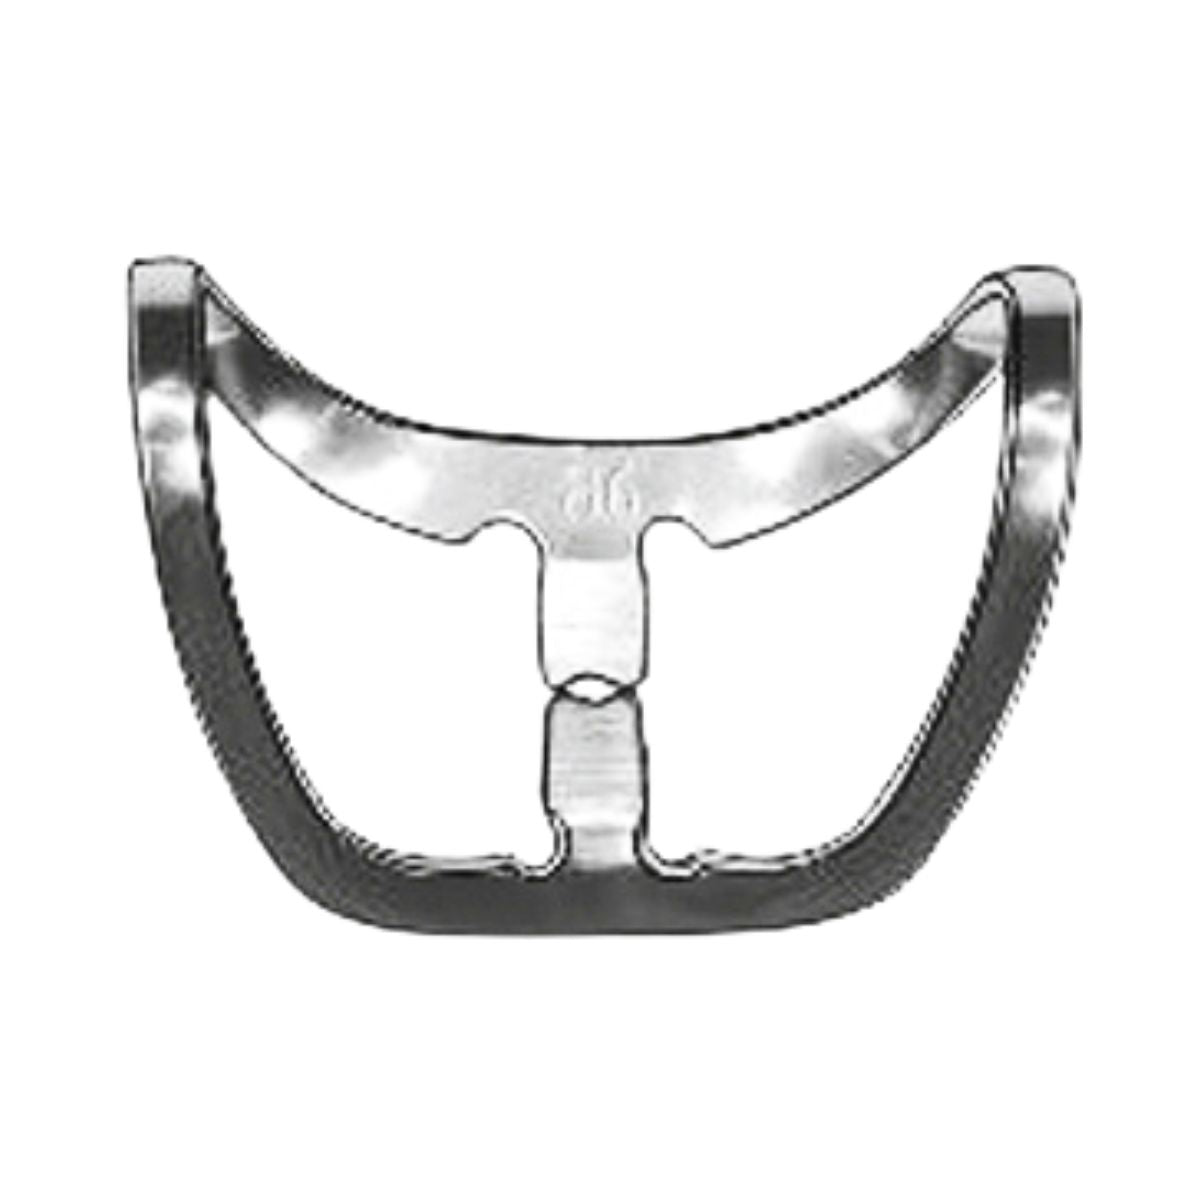 Tor VM B6 Butterfly With Jaws Standard Dam Clamp Hook